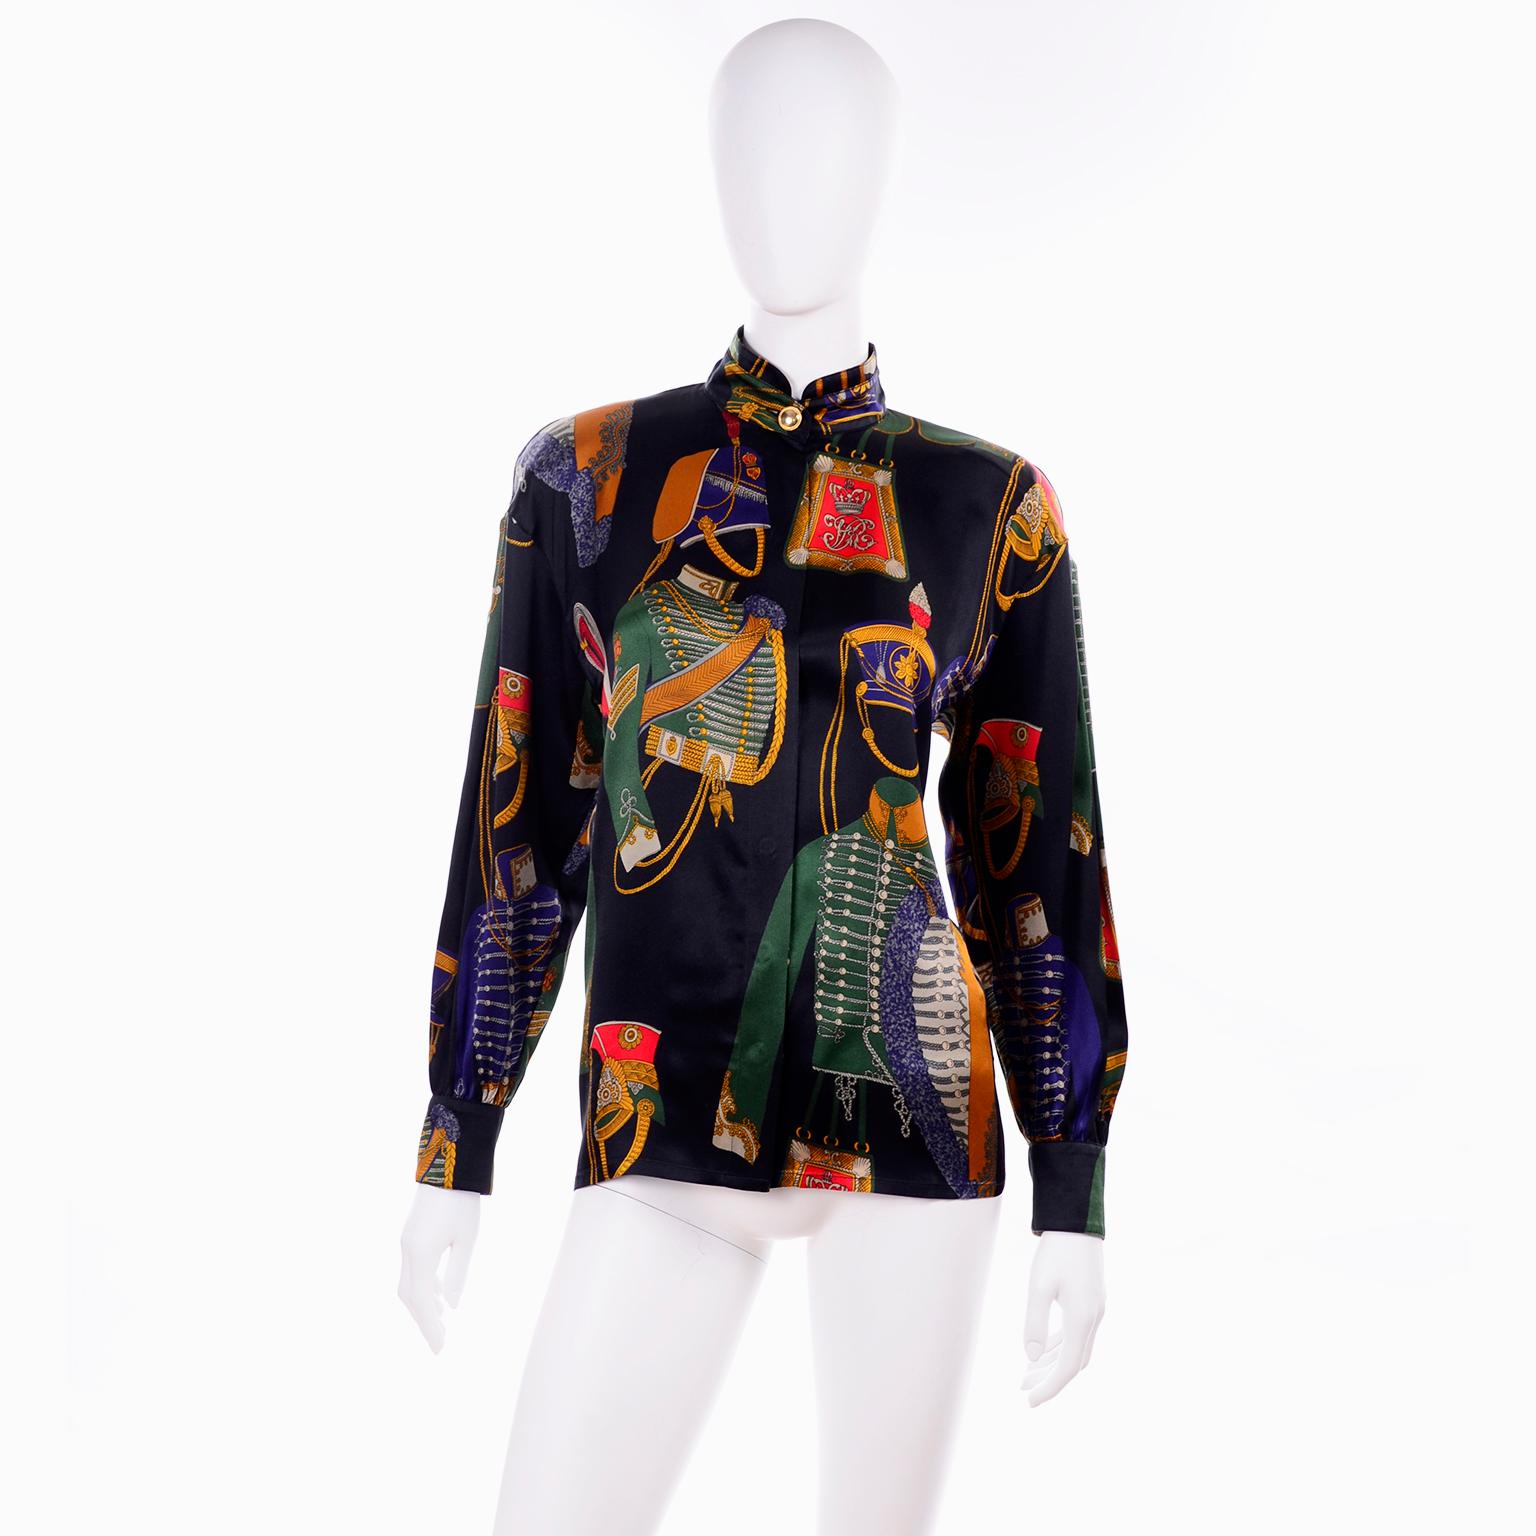 This vintage Escada silk blouse was designed by Margaretha Ley and made in Germany in the 1980's.  The blouse fabric is a Deep green, red, blue, gold and cream novelty print that includes various antique military soldier's costumes and there is a